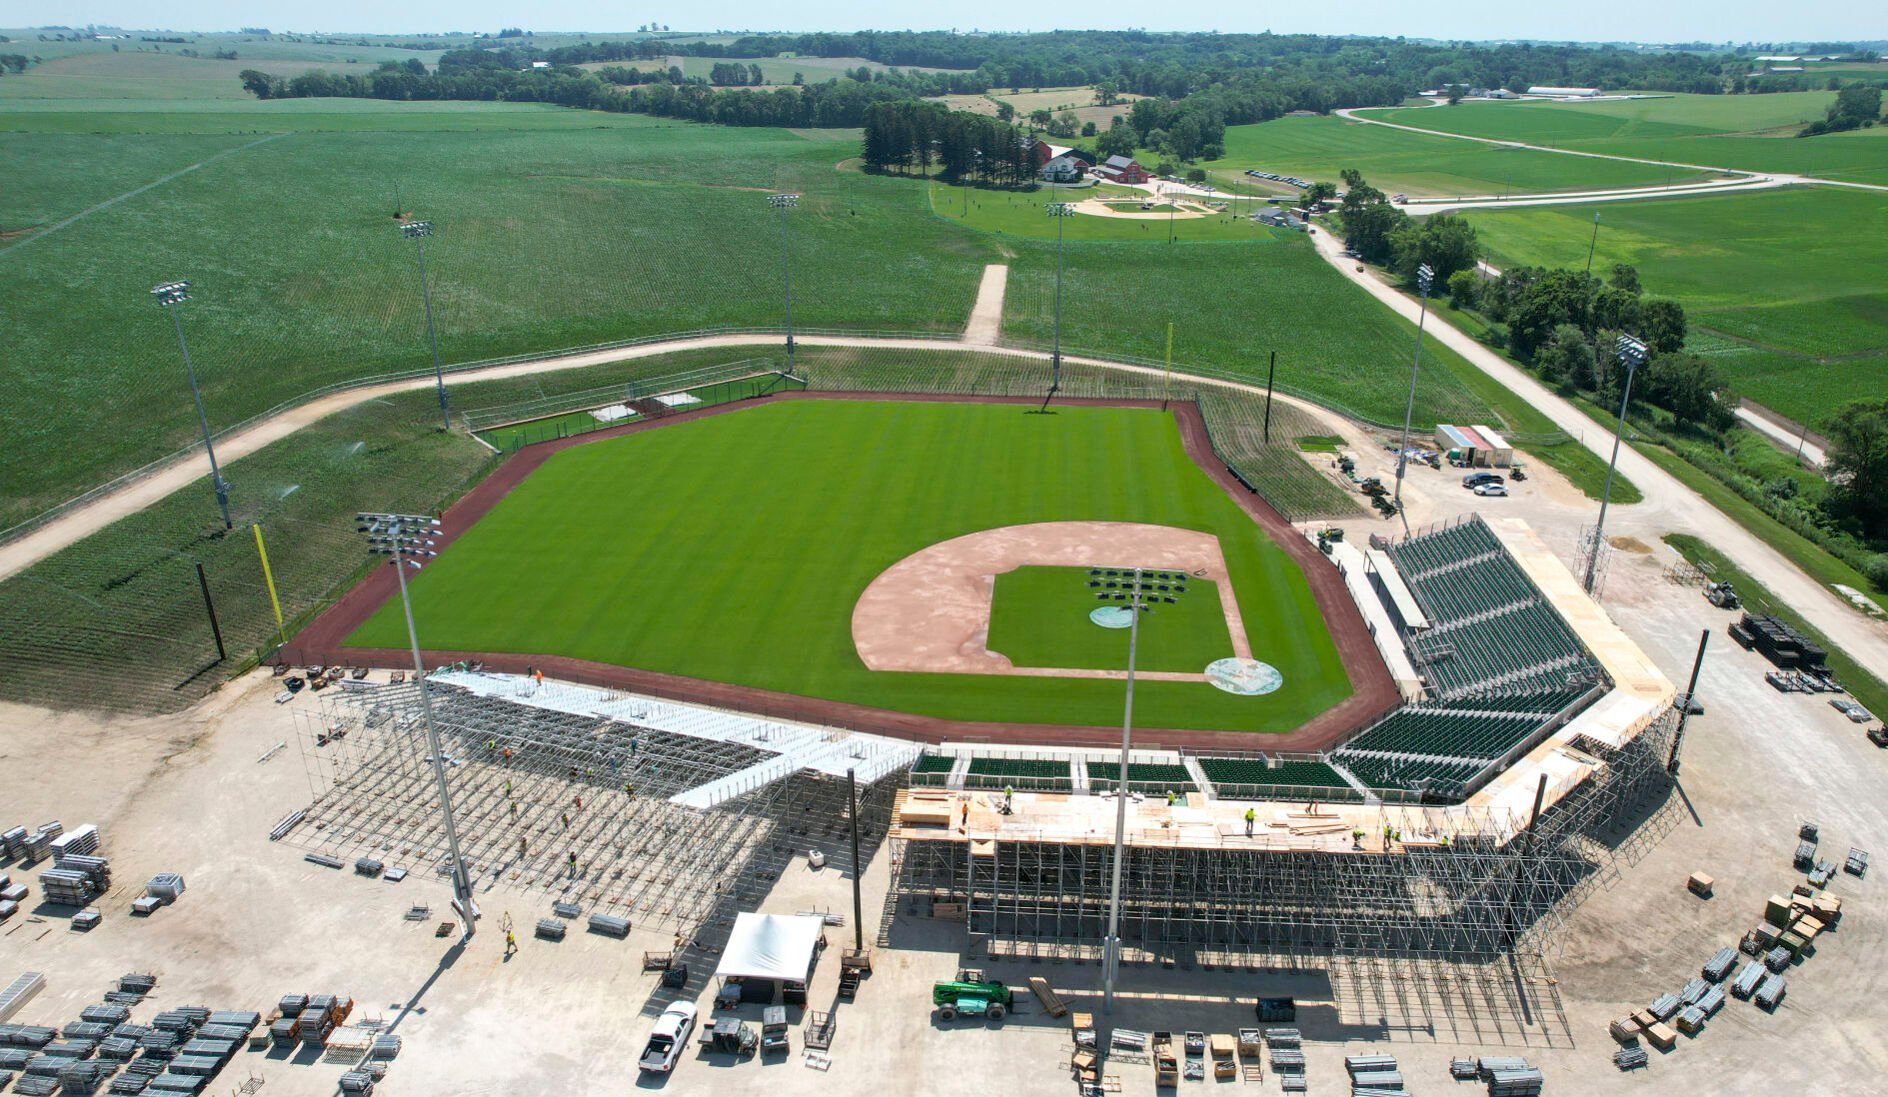 Work continues Tuesday on constructing the seats at the Major League Baseball field in Dyersville, Iowa.    PHOTO CREDIT: Dave Kettering